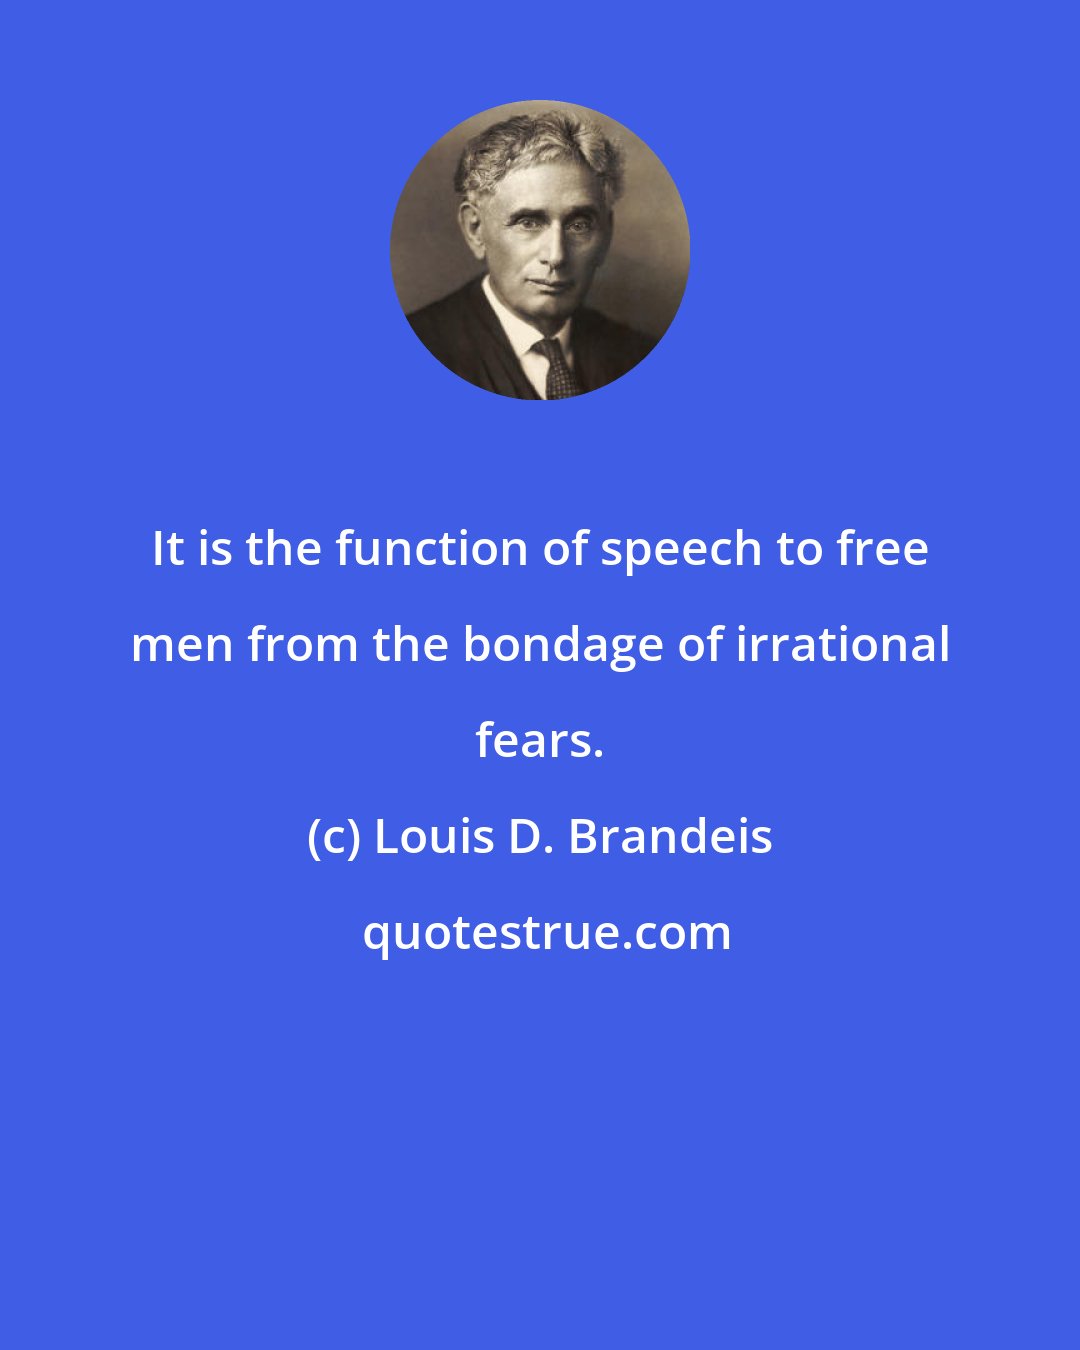 Louis D. Brandeis: It is the function of speech to free men from the bondage of irrational fears.